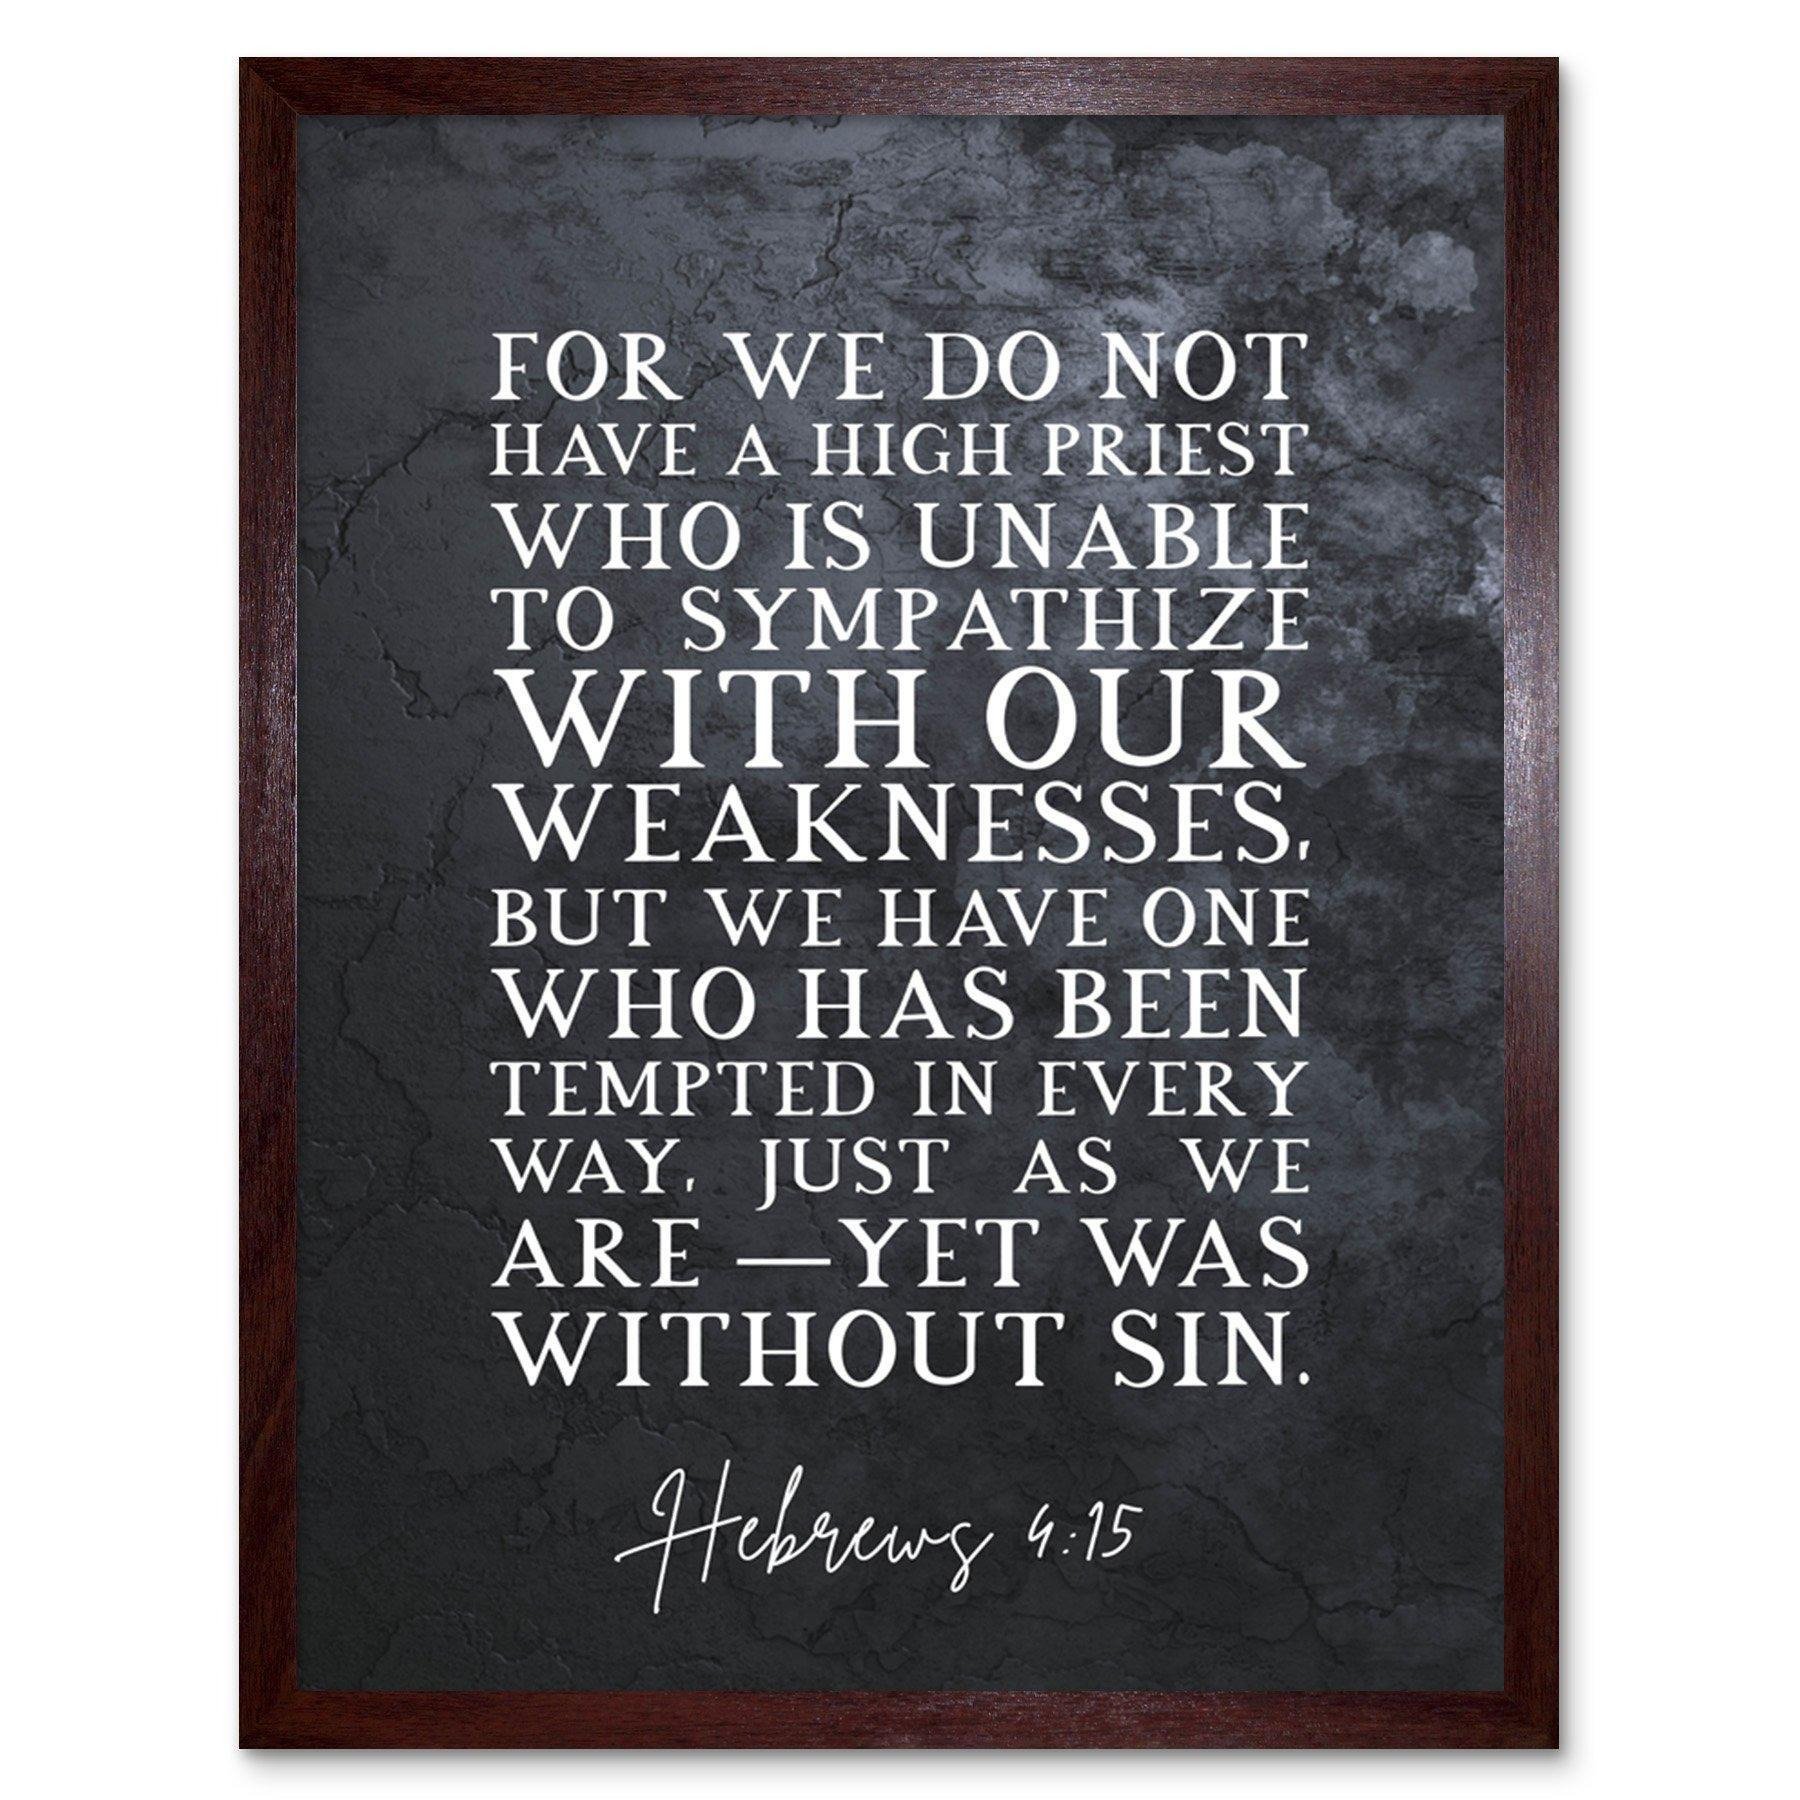 Hebrews 4:15 One Who Has Been Tempted Yet Was Without Sin Christian Bible Verse Quote Scripture Typography Art Print Framed Poster Wall Decor 12x16 inch - image 1